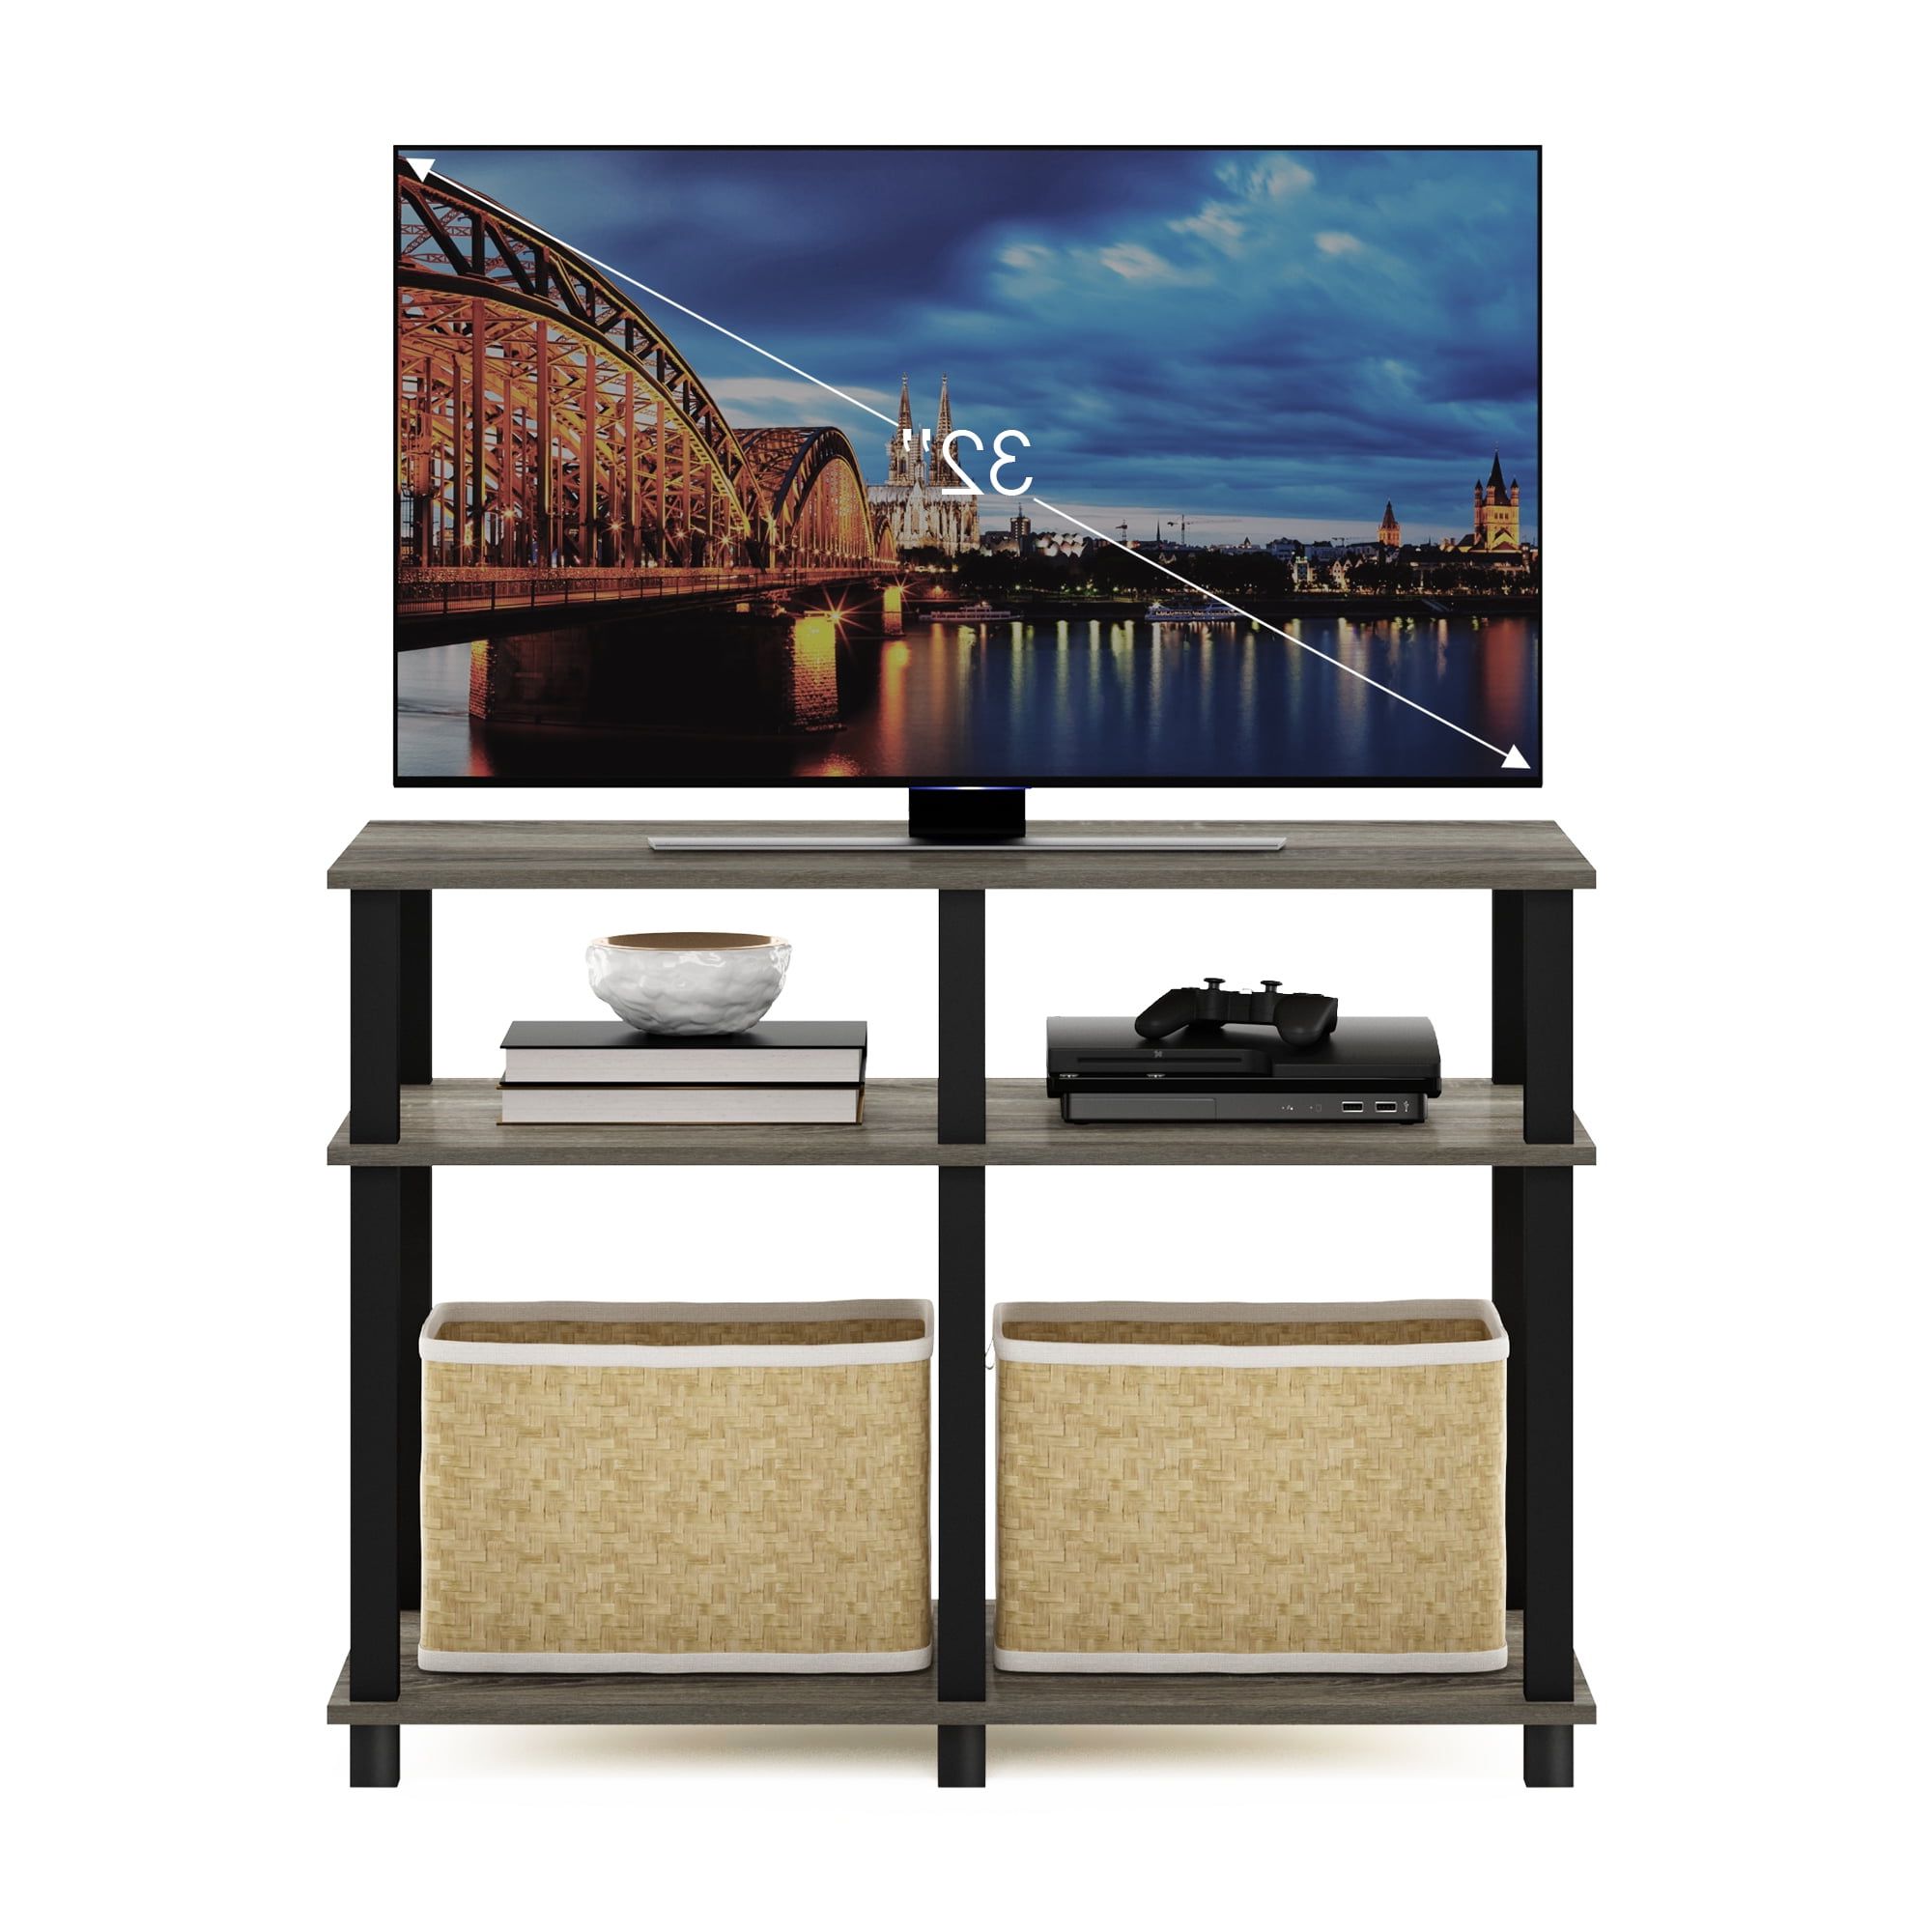 Furinno Romain Turn N Tube Tv Stand For Tv Up To 40 Inch, Espresso/black –  Walmart For Romain Stands For Tvs (View 2 of 20)